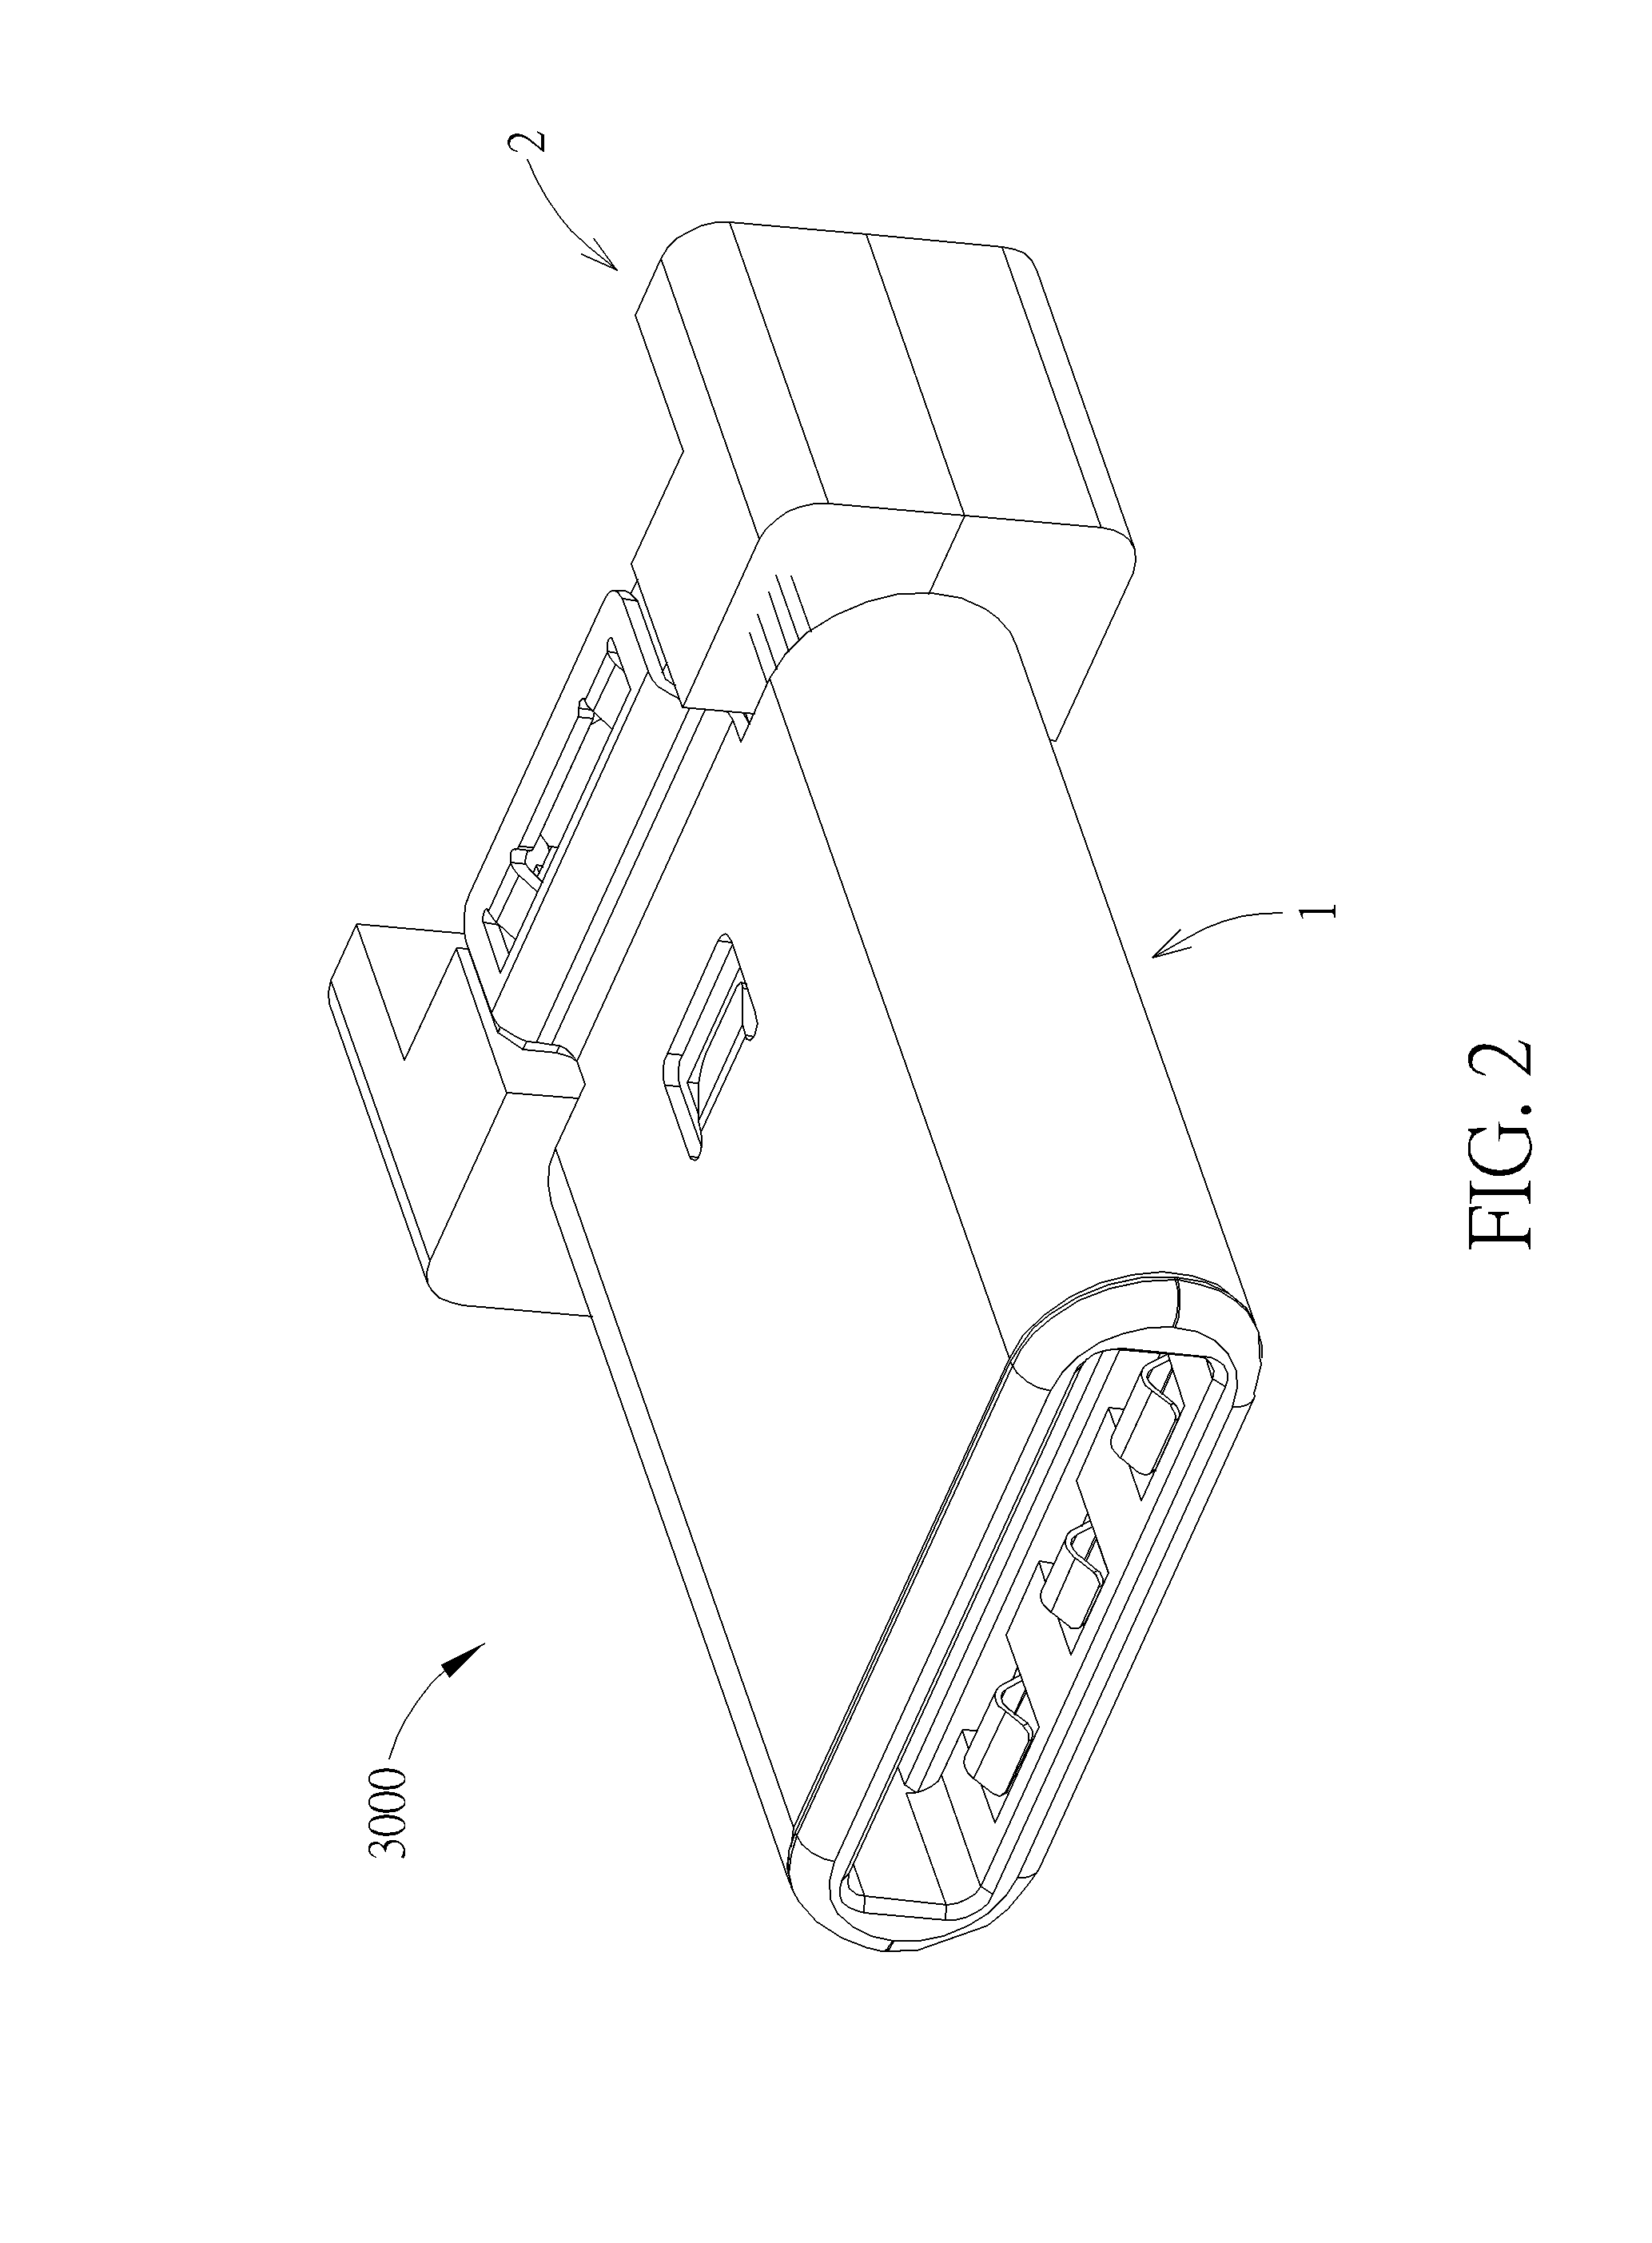 Electrical plug connector with shielding and grounding features